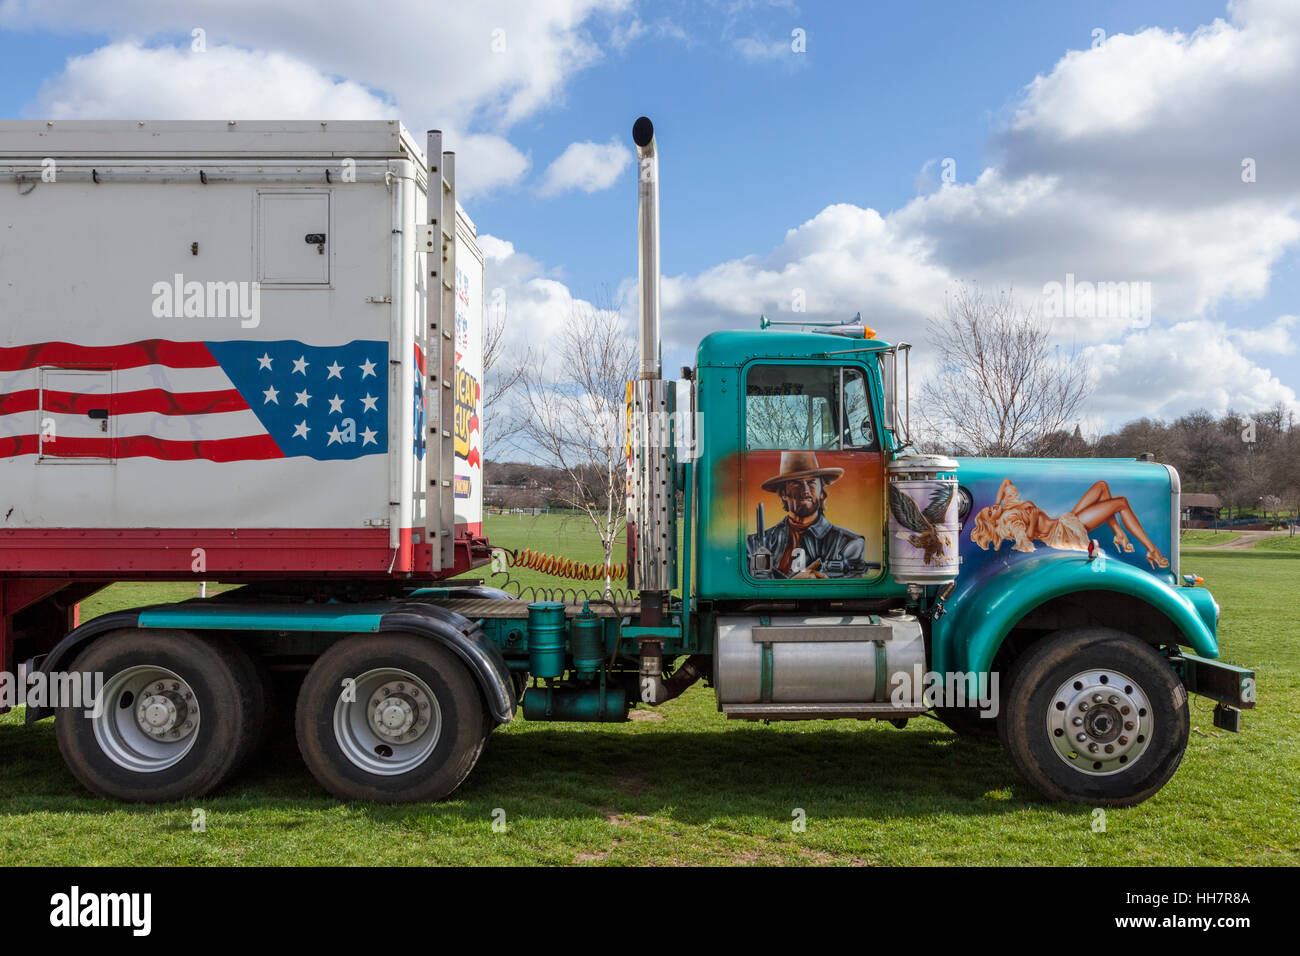 Painted truck and cab from Uncle Sam's American Circus. Nottingham, England, UK Stock Photo